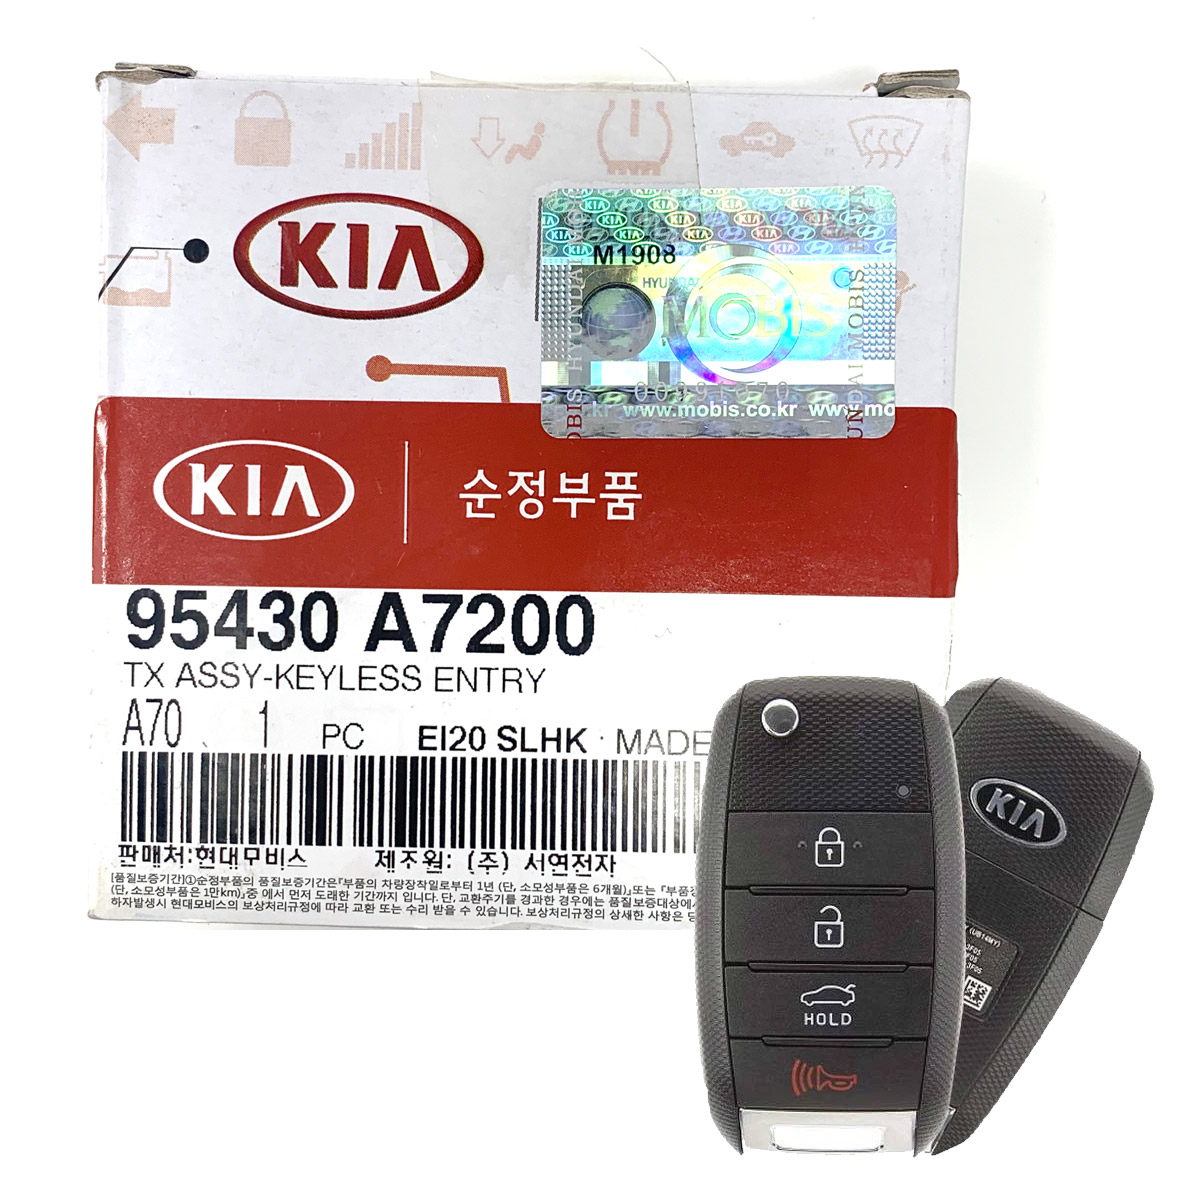 KeylessOption Keyless Entry PINHA-T008 Remote of Key (Pack Strap Forte With  Kia for Clicker Fob Car 2) 通販